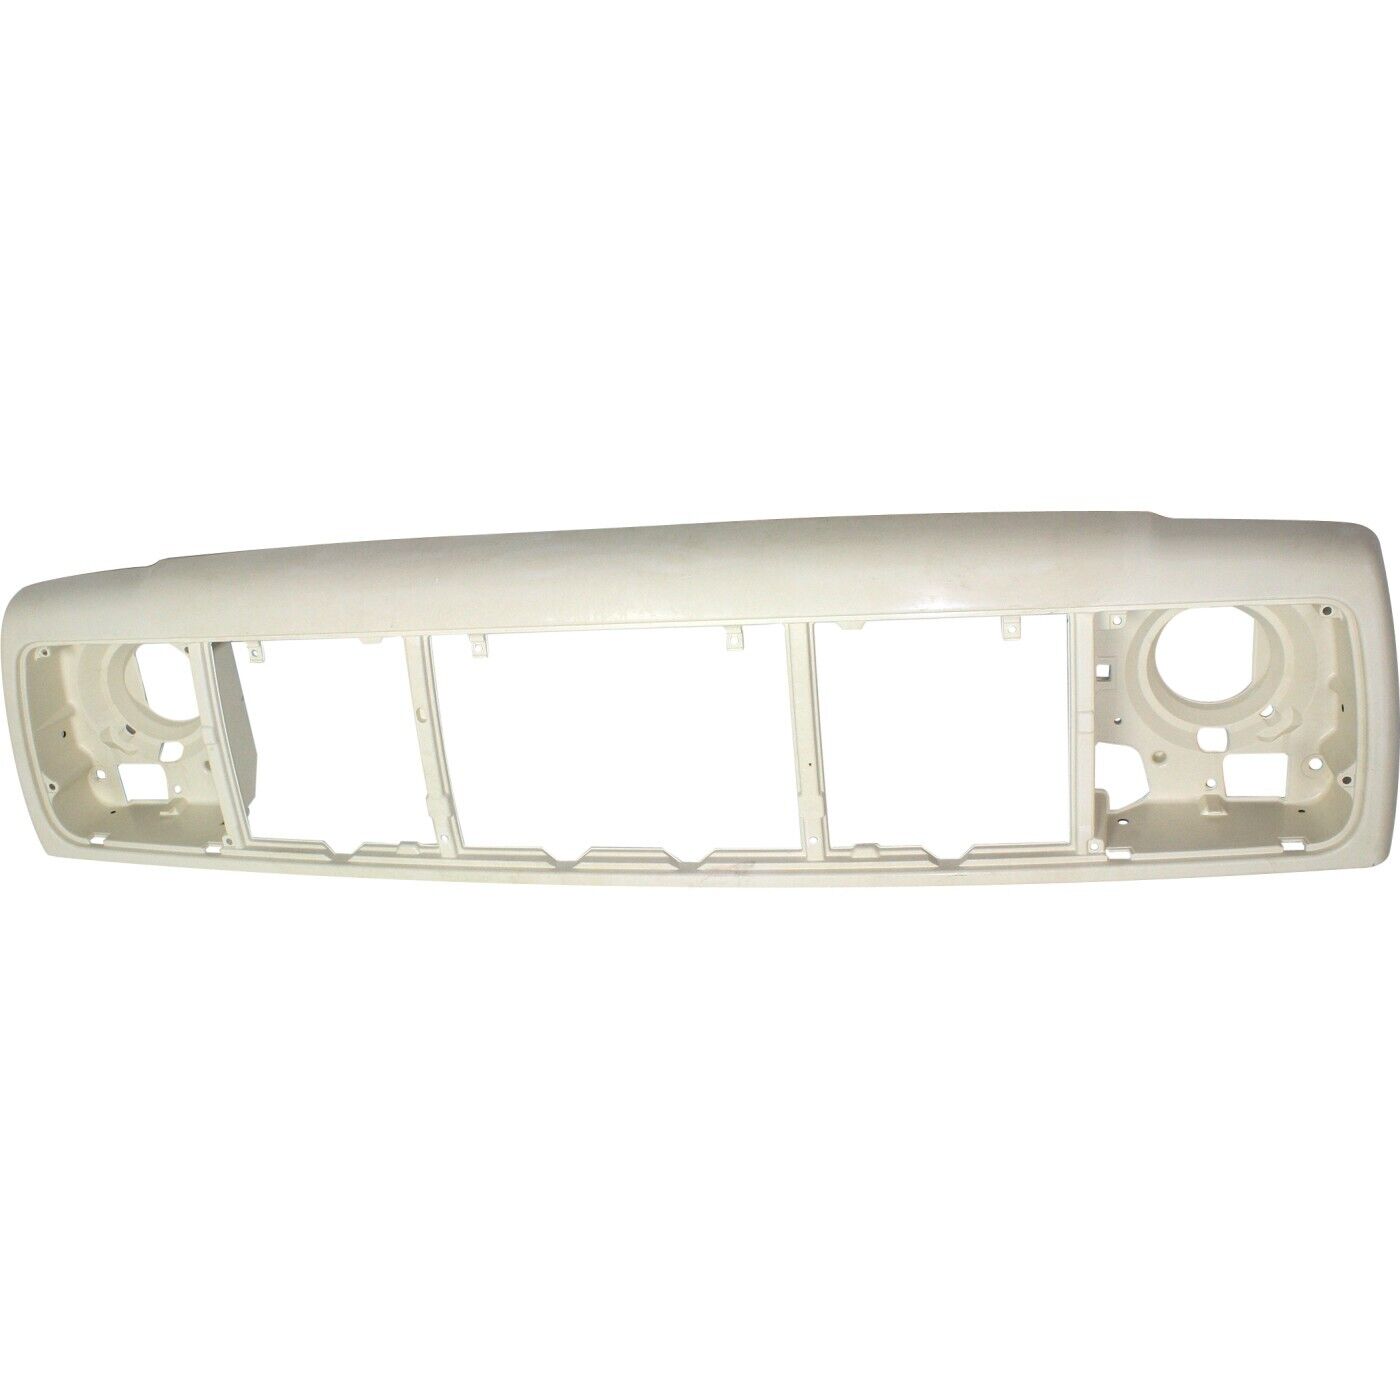 Header Panel For 1997-2001 Jeep Cherokee 4Cyl 6Cyl Engine Thermoplastic